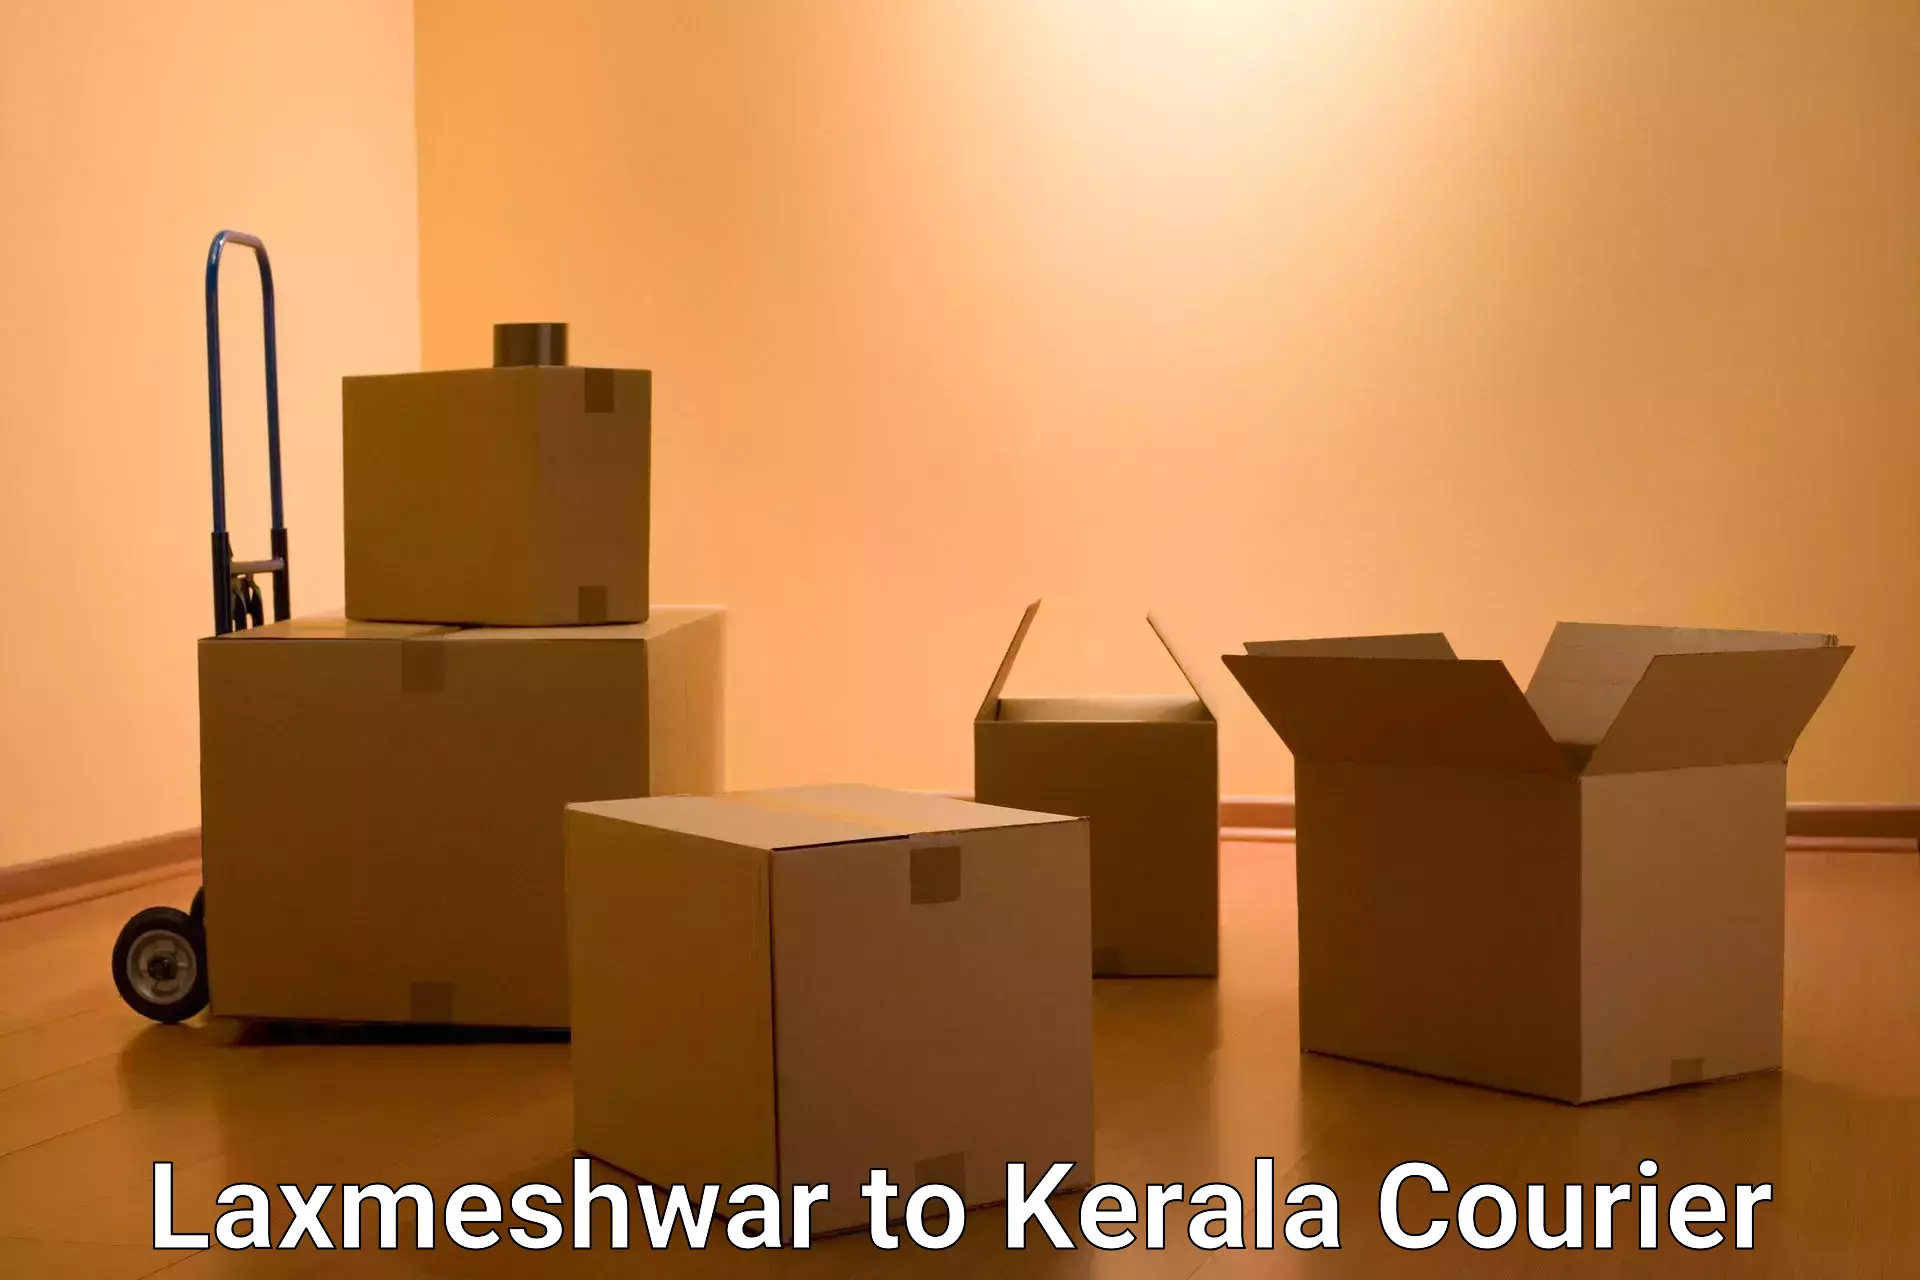 Optimized delivery routes in Laxmeshwar to Cochin Port Kochi